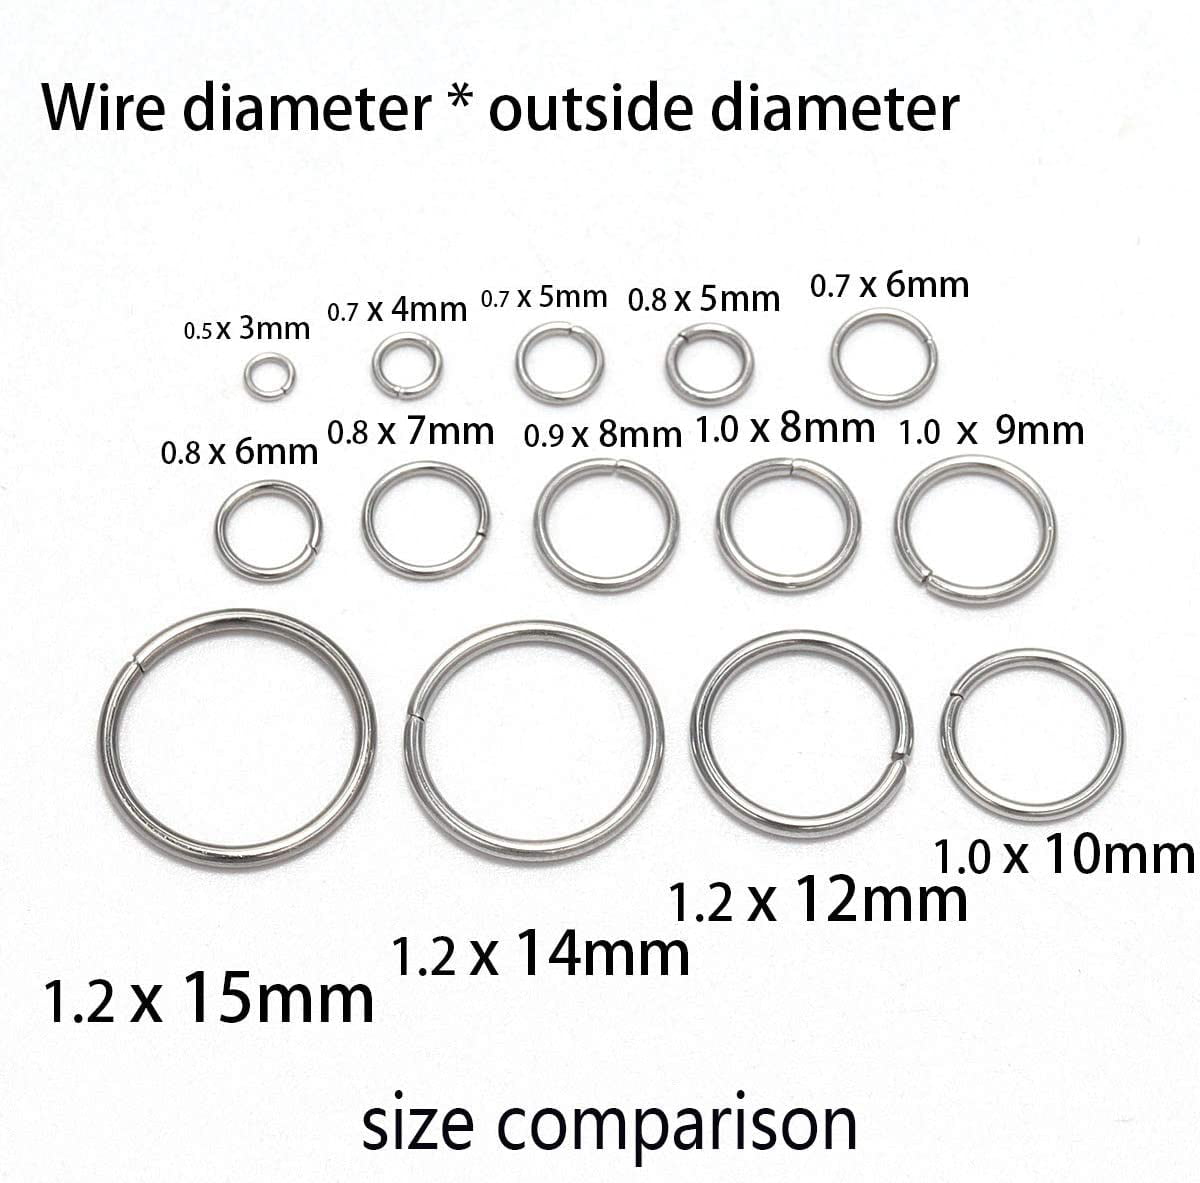 14 AWG Stainless Steel Jump Rings - 1 Ounce